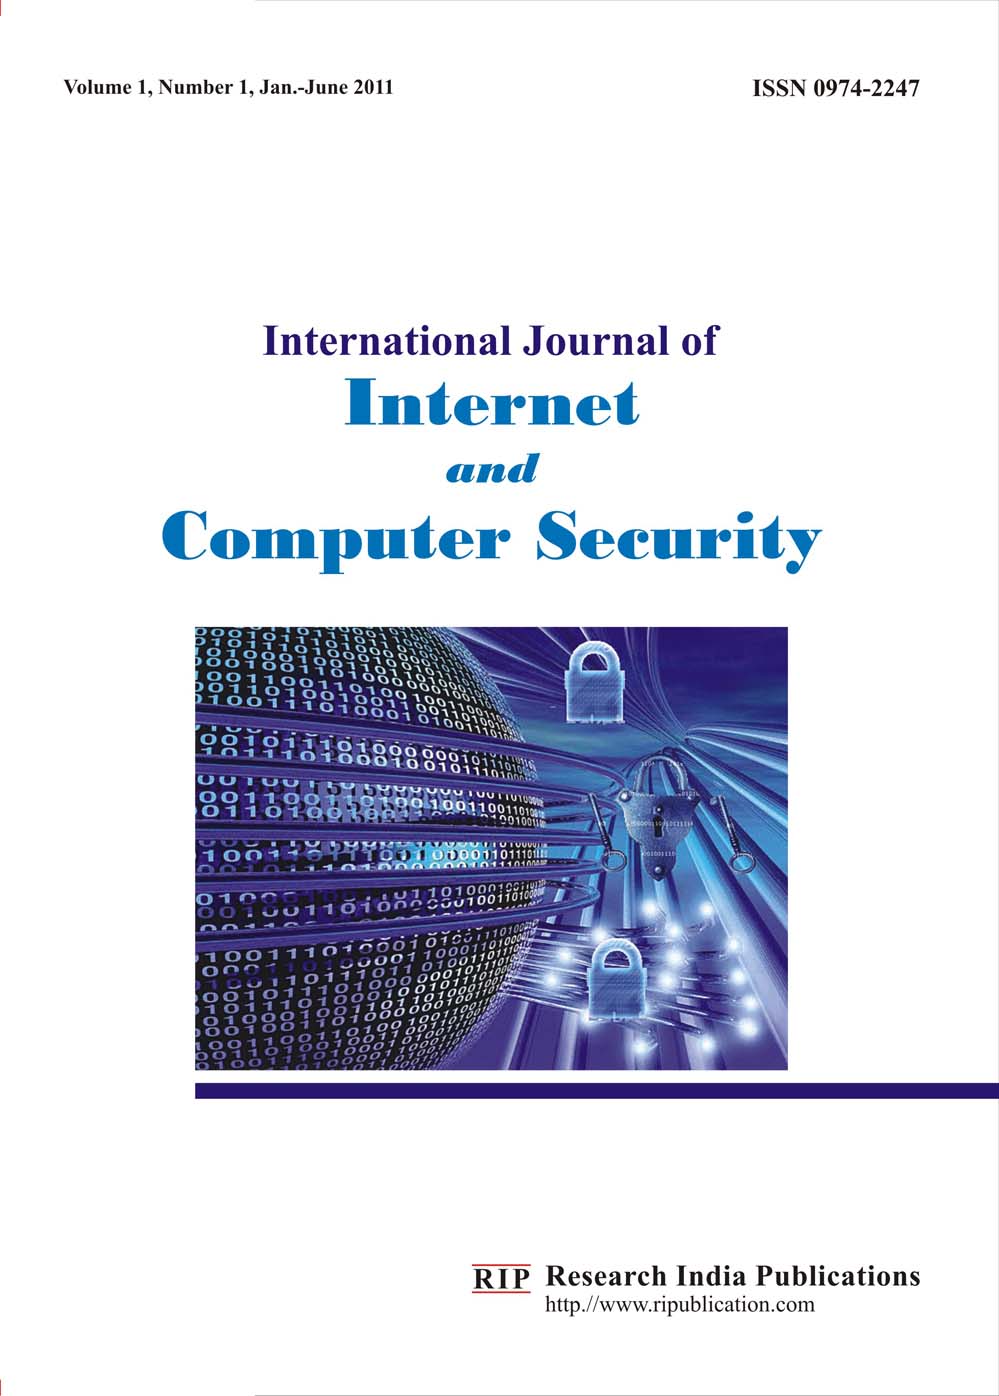 International Journal of Internet and Computer Security